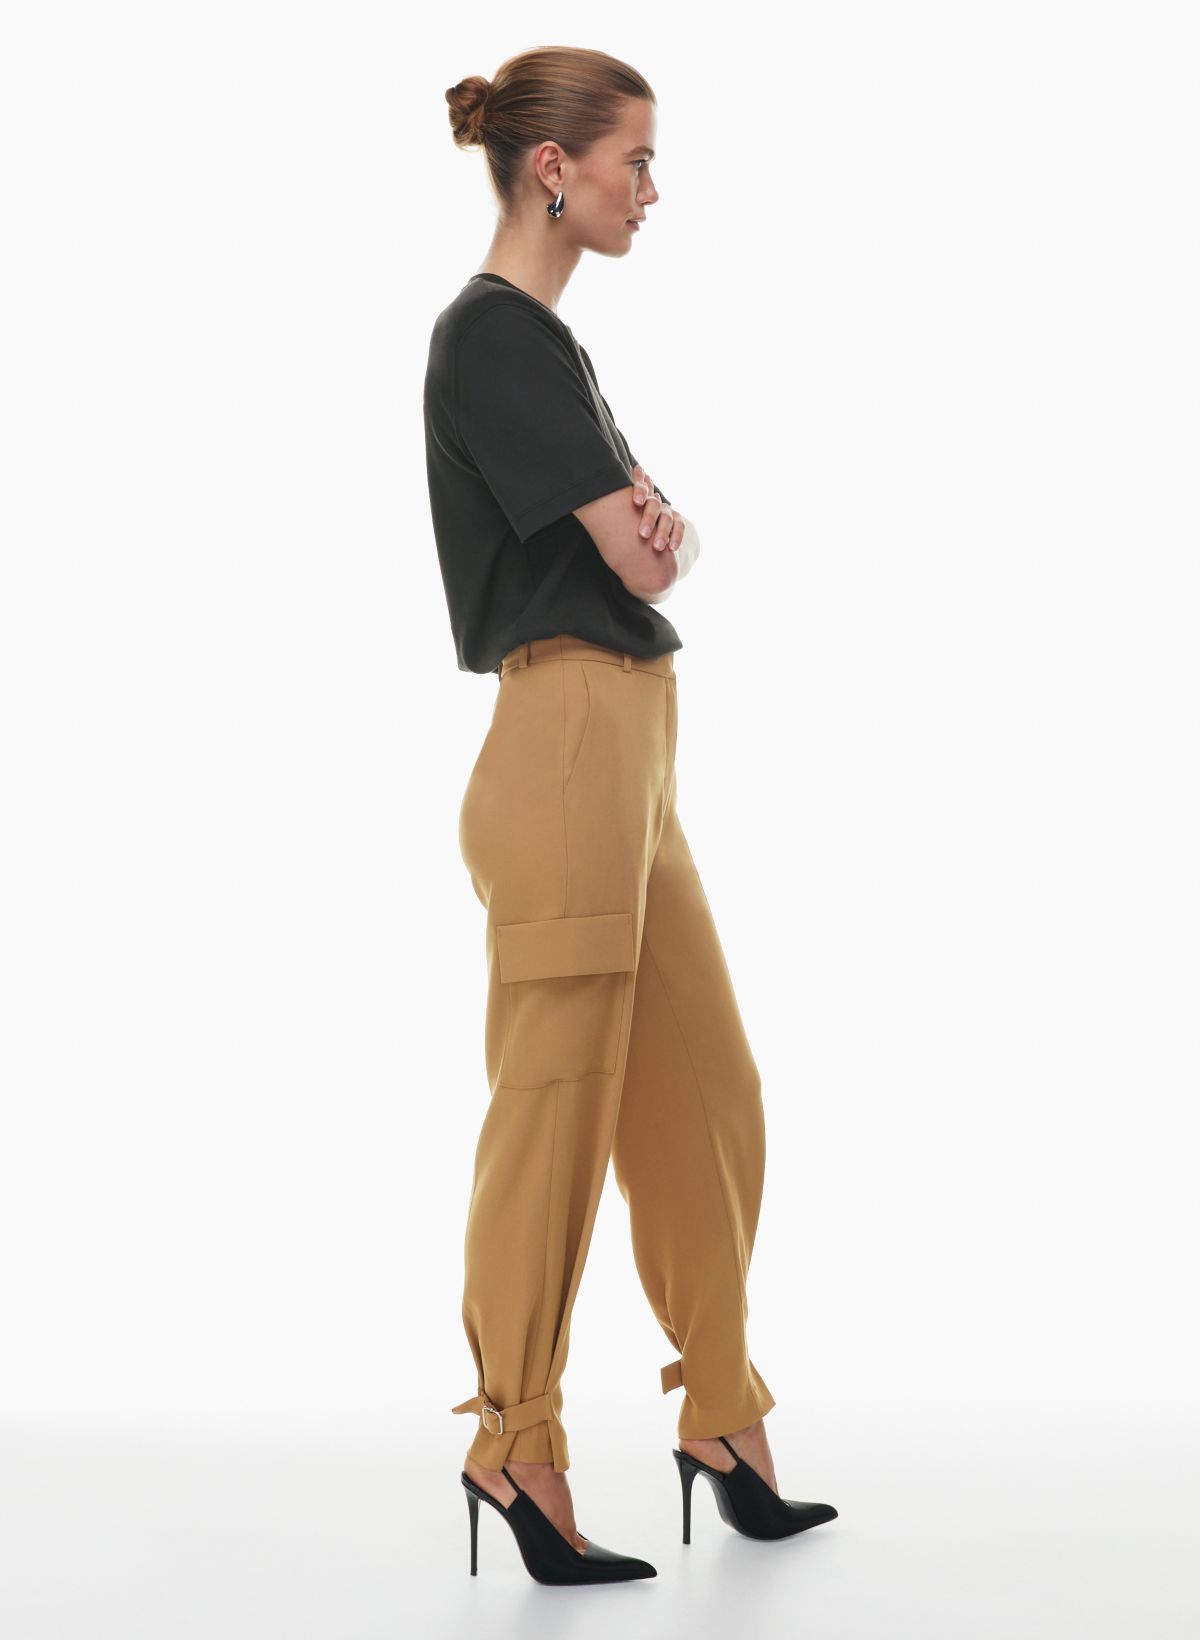 Women's High-Rise Satin Cargo Pants - A New Day Brown 2